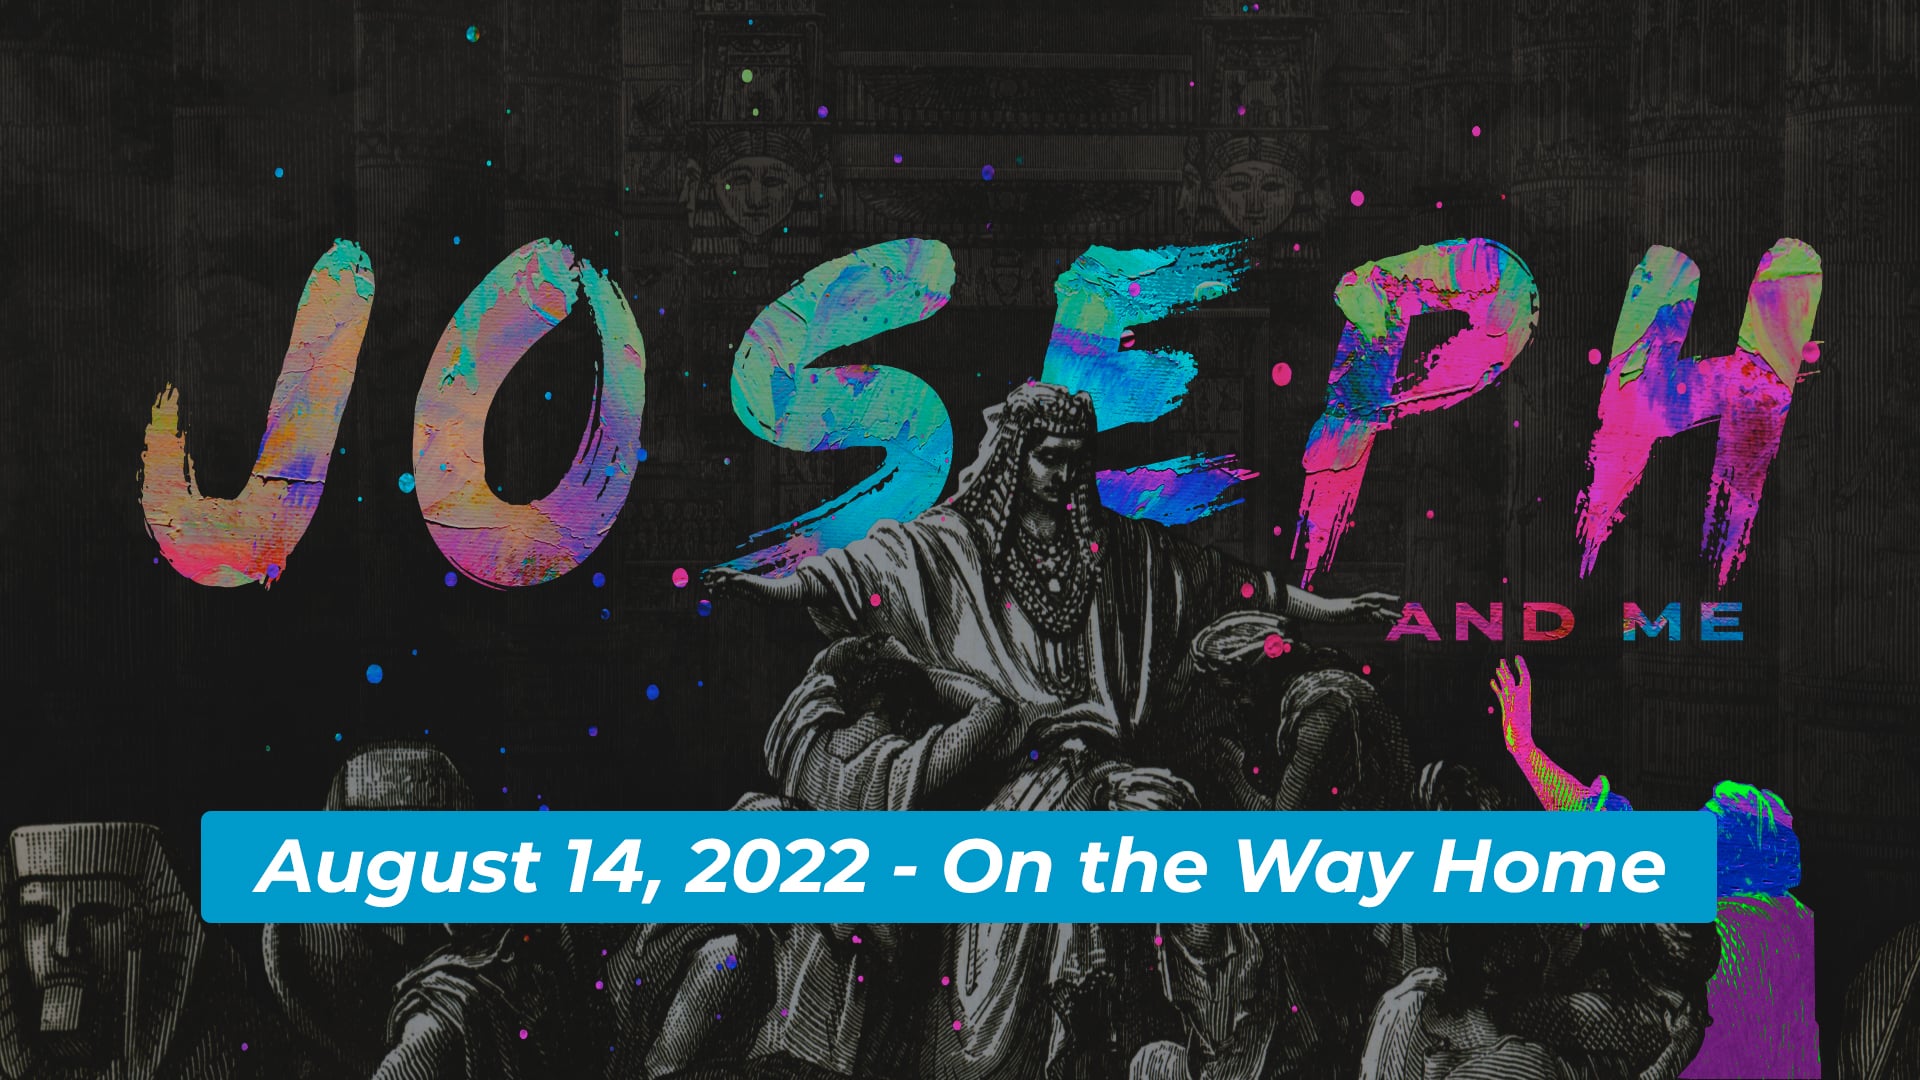 August 14, 2022 - Joseph & Me: On the Way Home